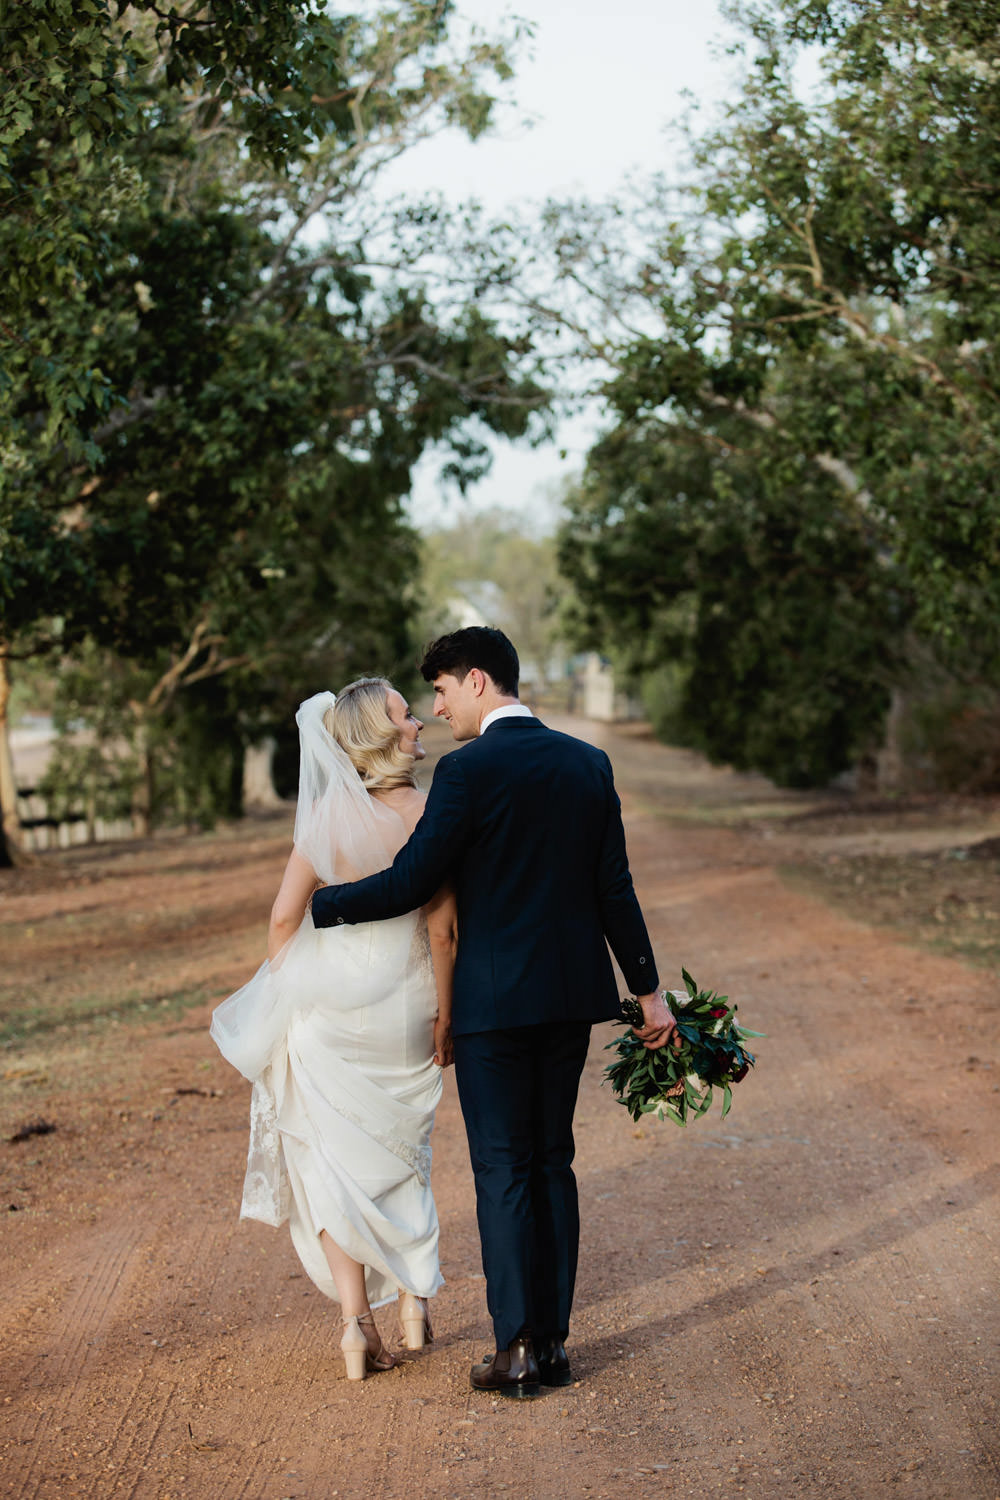 natural, fun, romantic-wedding-photography at Spicers-hiddenvale-QuinceandMulberryStudios